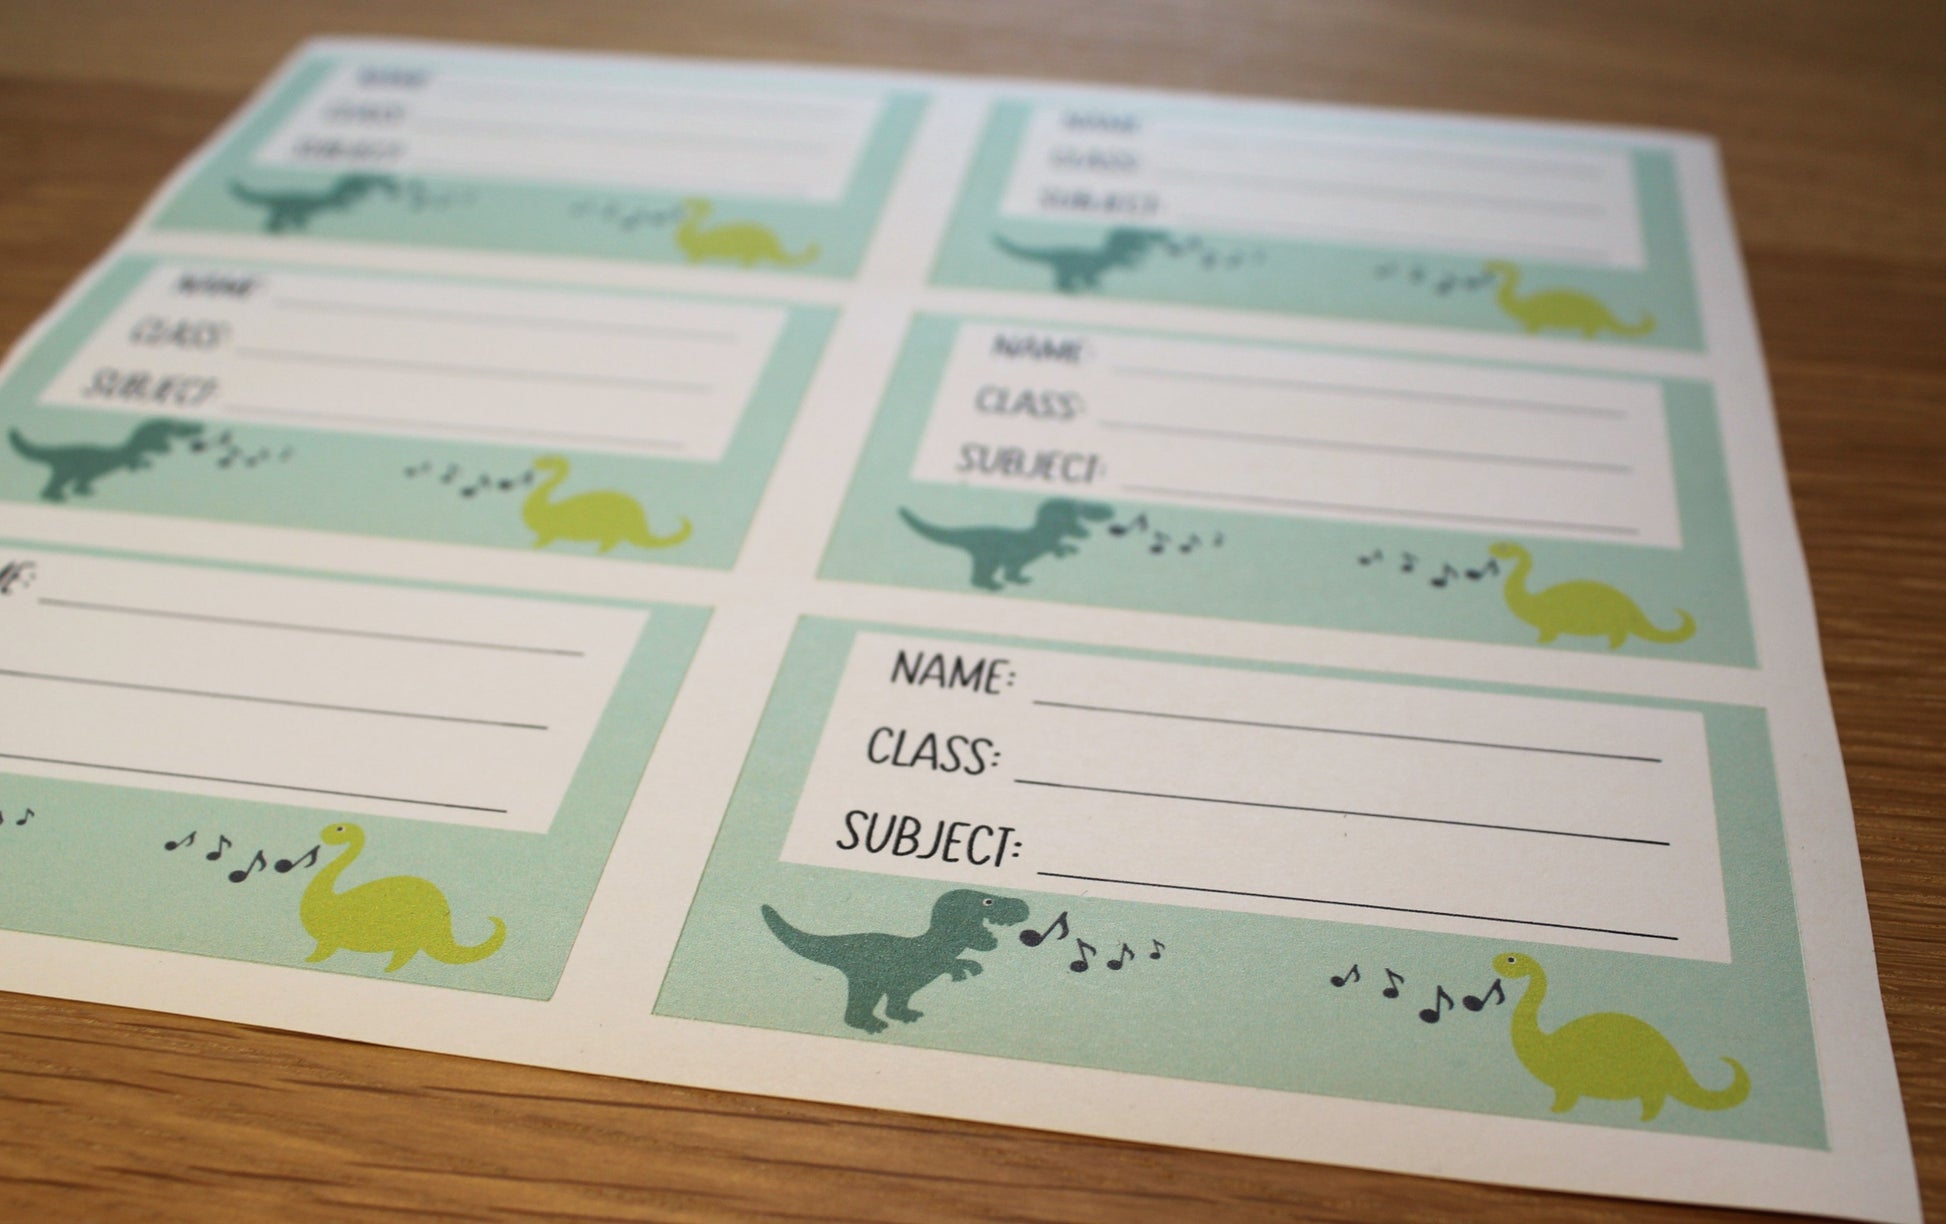 A sheet of 6 book labels with spaces to write name, class and subject. Picture of 2 dinosaurs with music notes.